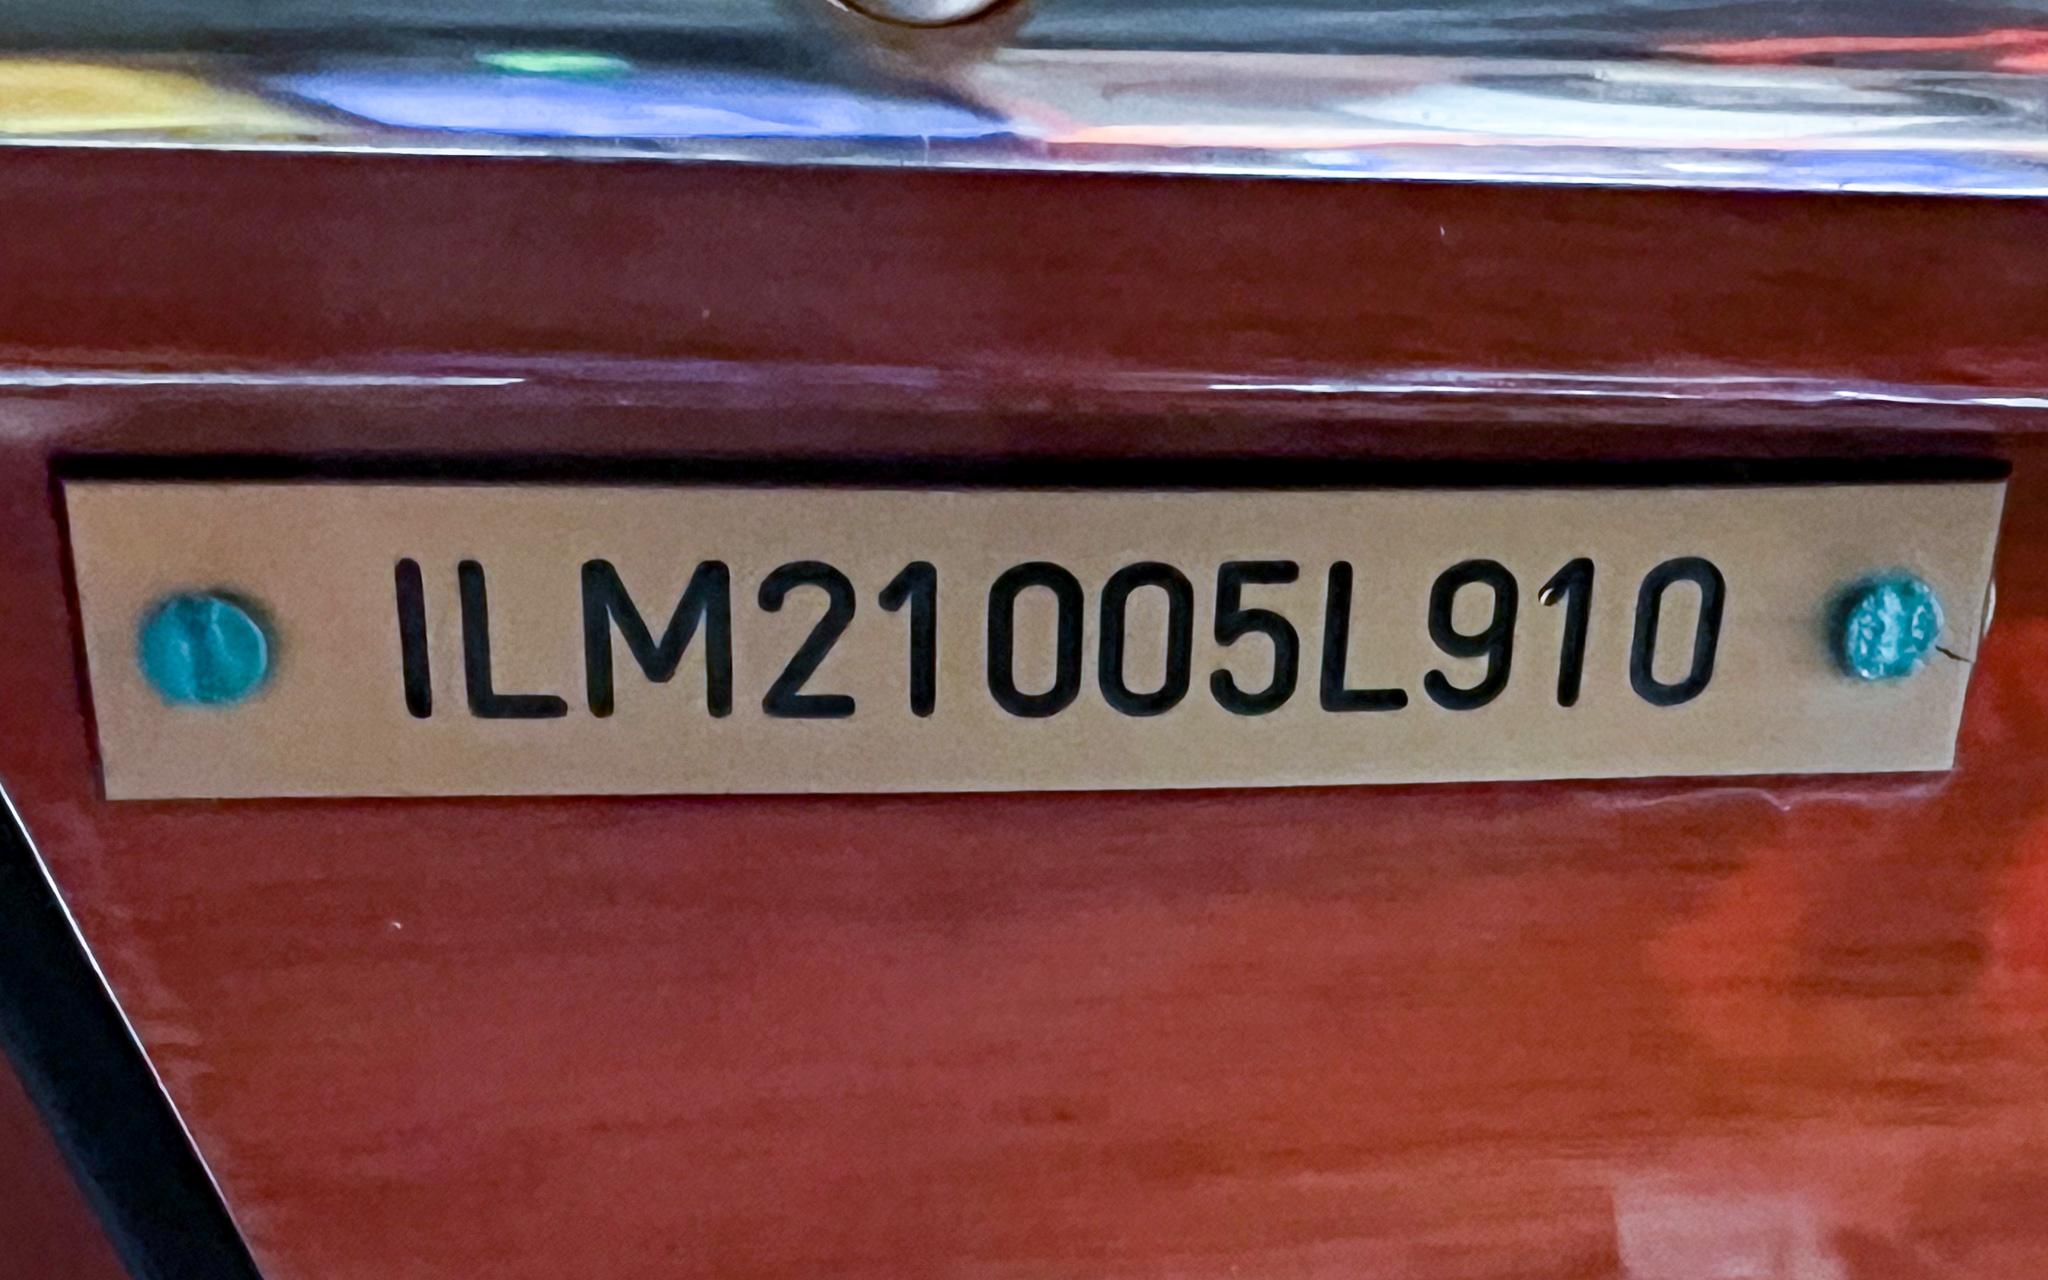 Handy Billy 21 - Bombay Sapphire - Hull Identification Number